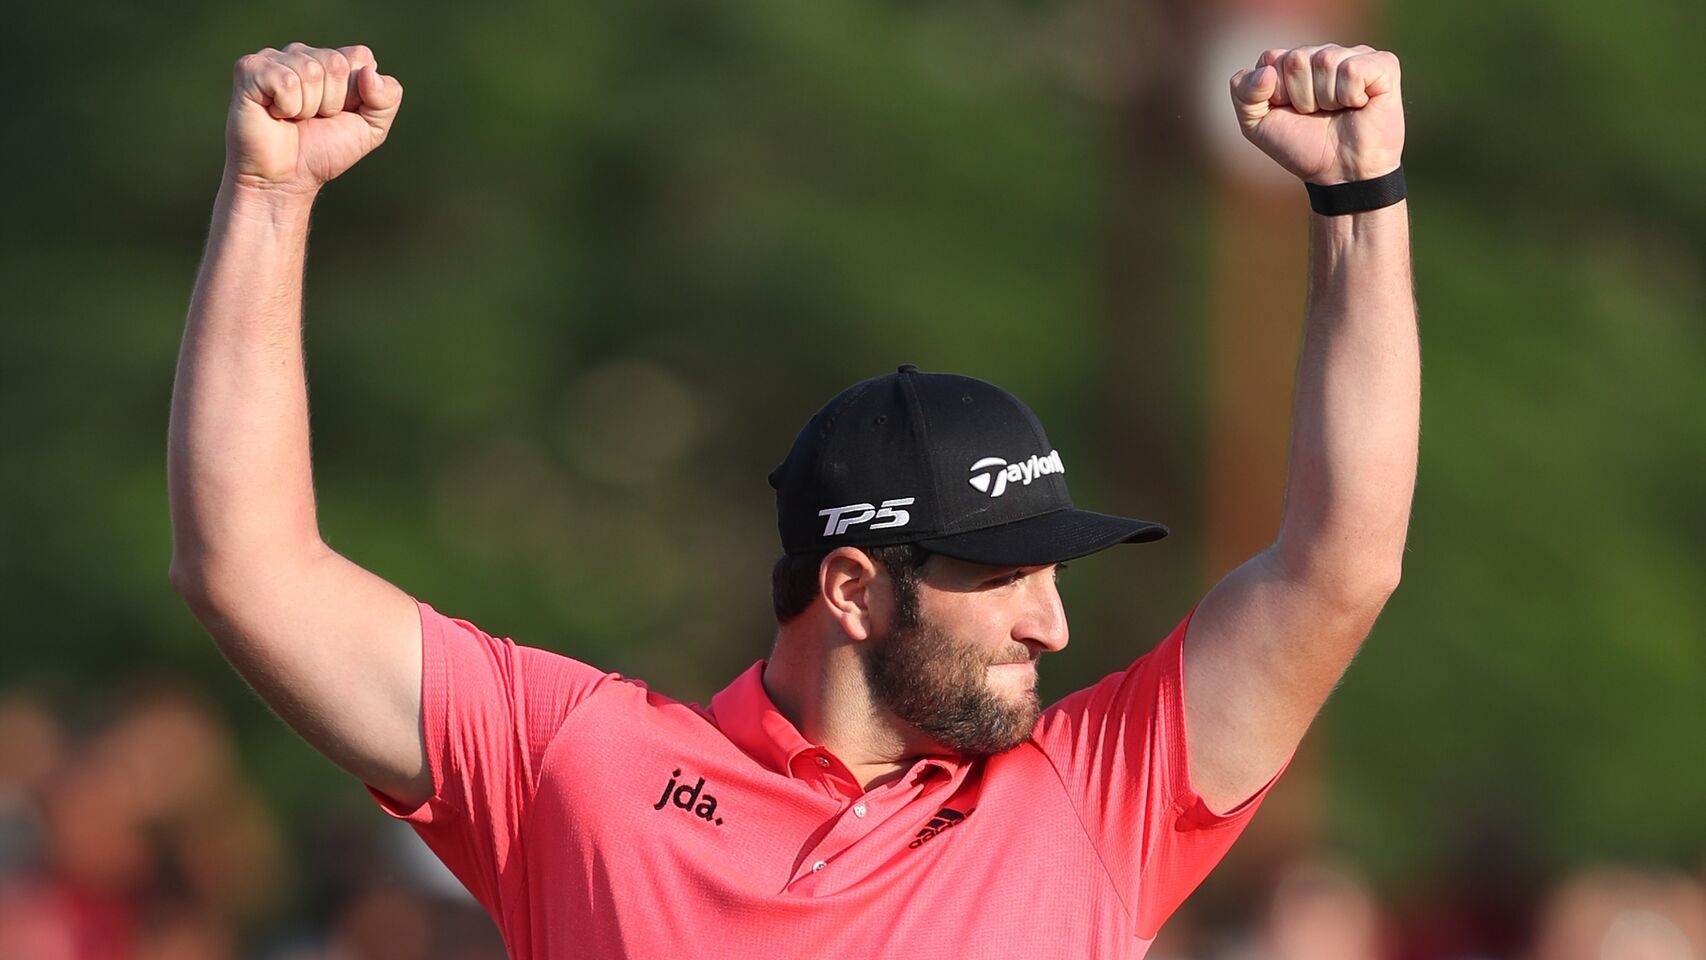 Rahm Goes Up, Down, Then Wins It All In Dubai Drama